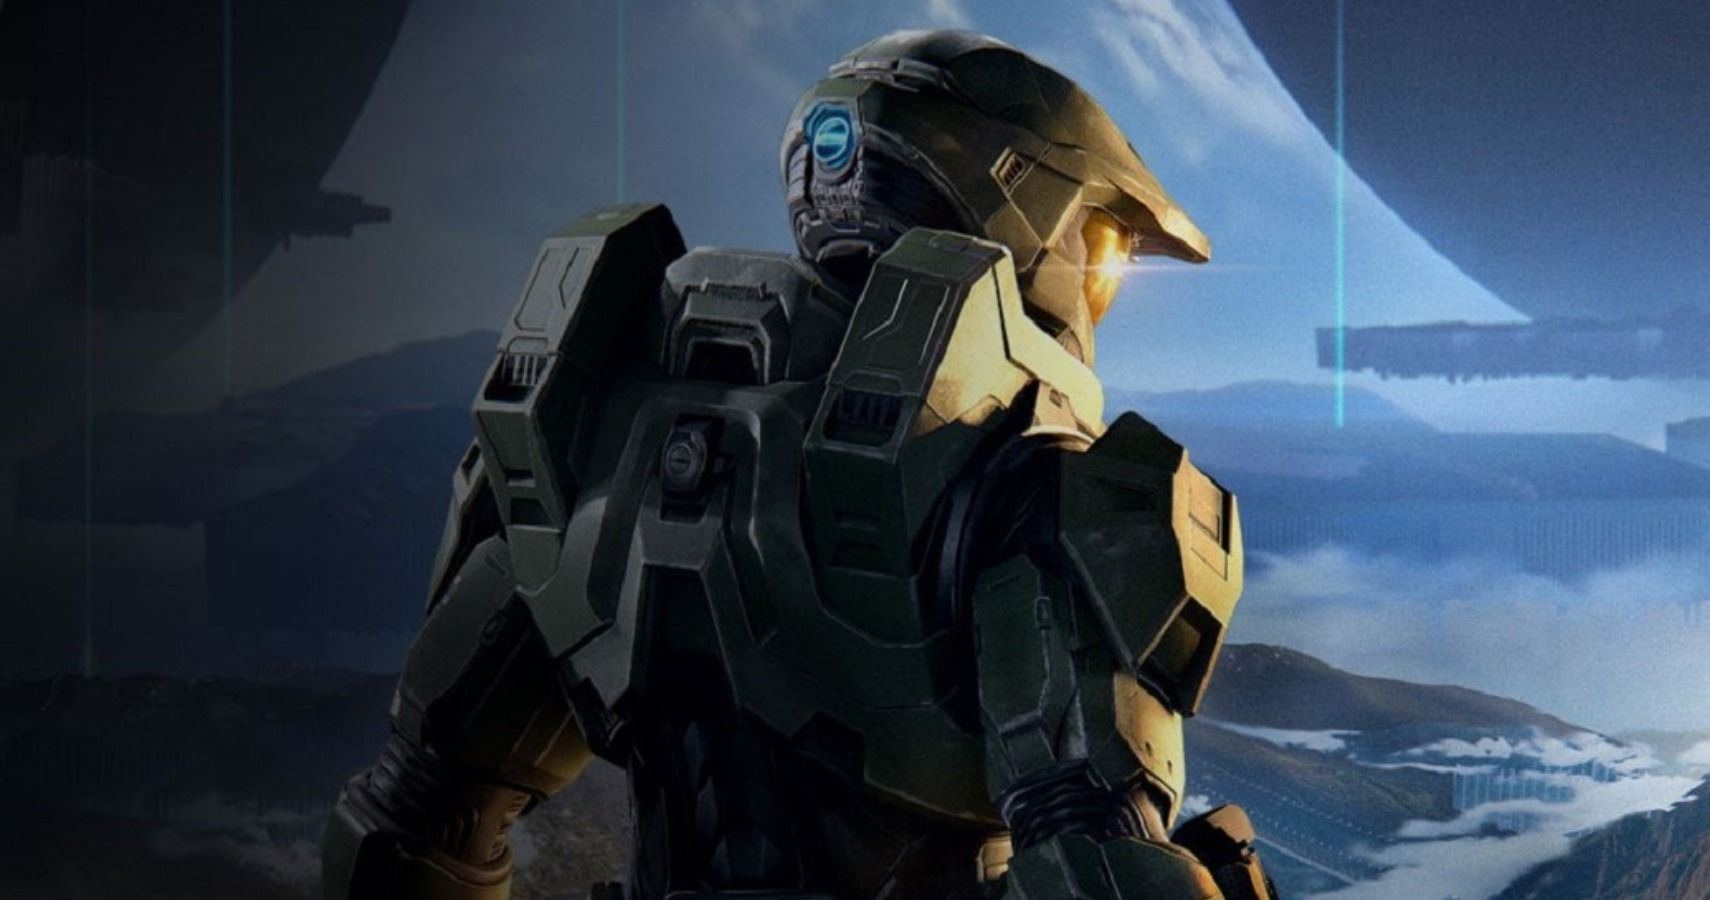 Halo Infinite Confirmed For July Xbox 20/20 Showcase | TheGamer